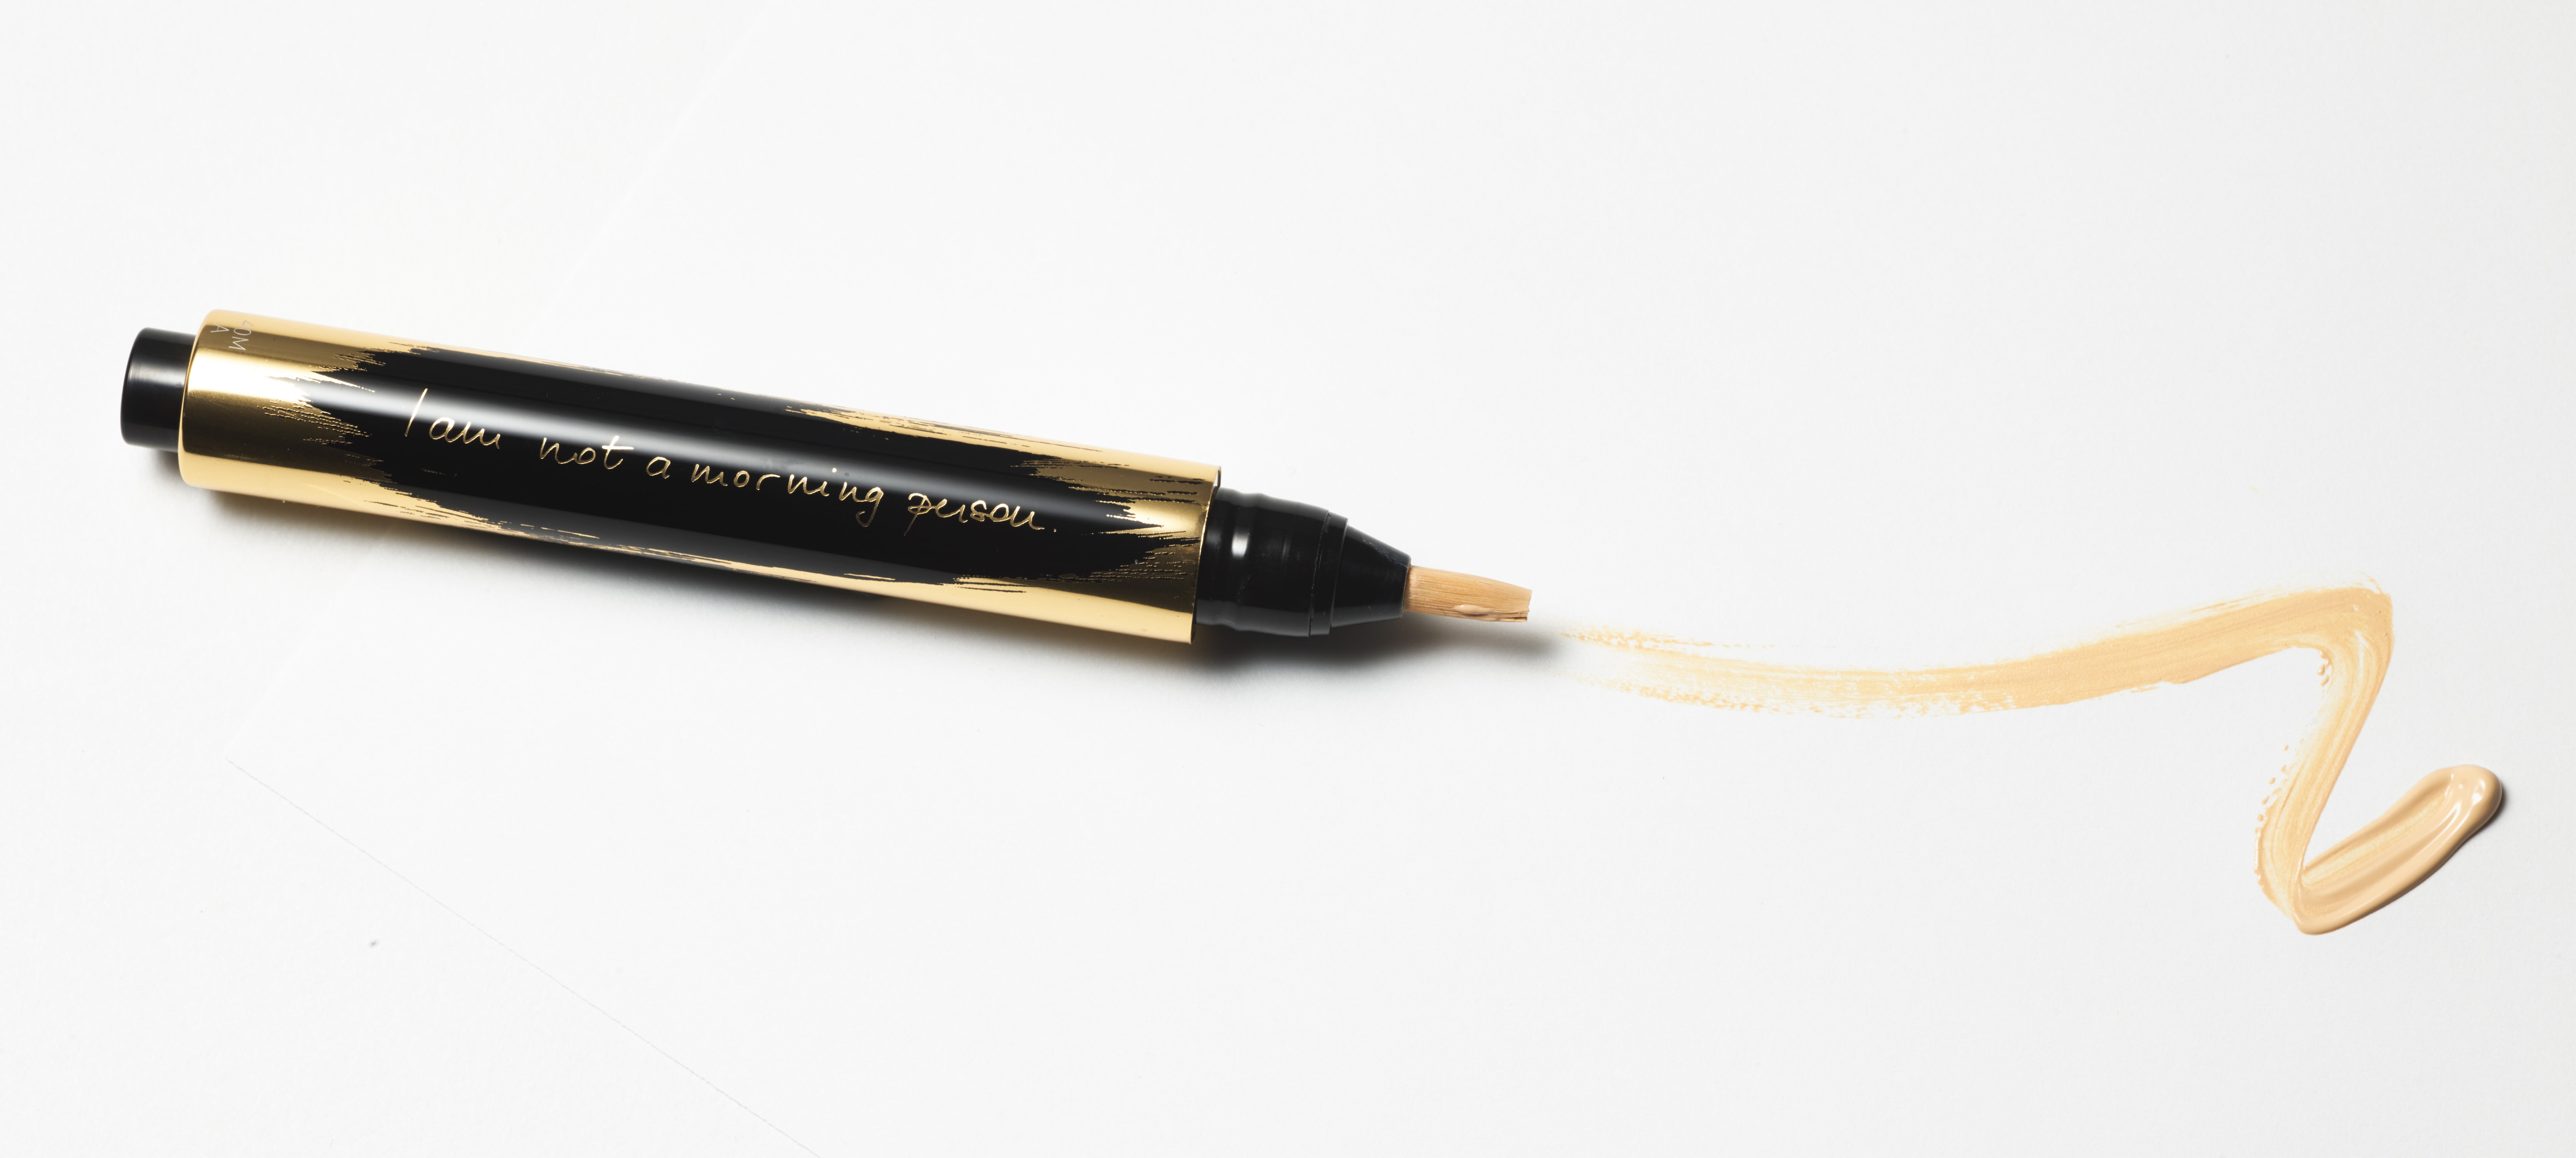 YSL Touche Eclat Slogan Edition limited edition